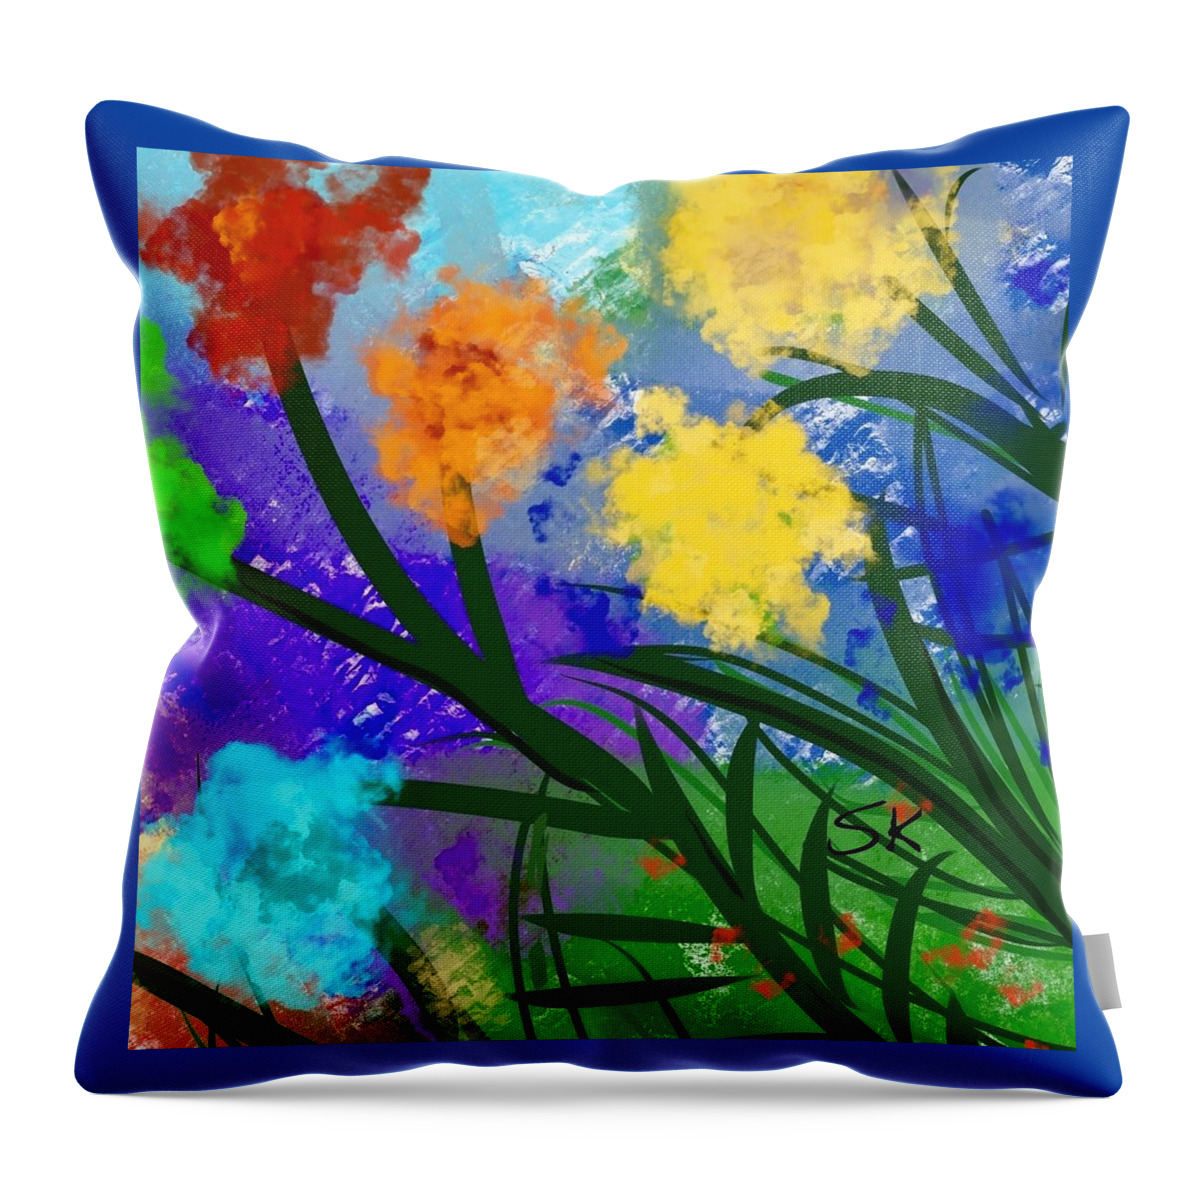 Flowers Throw Pillow featuring the digital art Fence Flowers Square by Sherry Killam